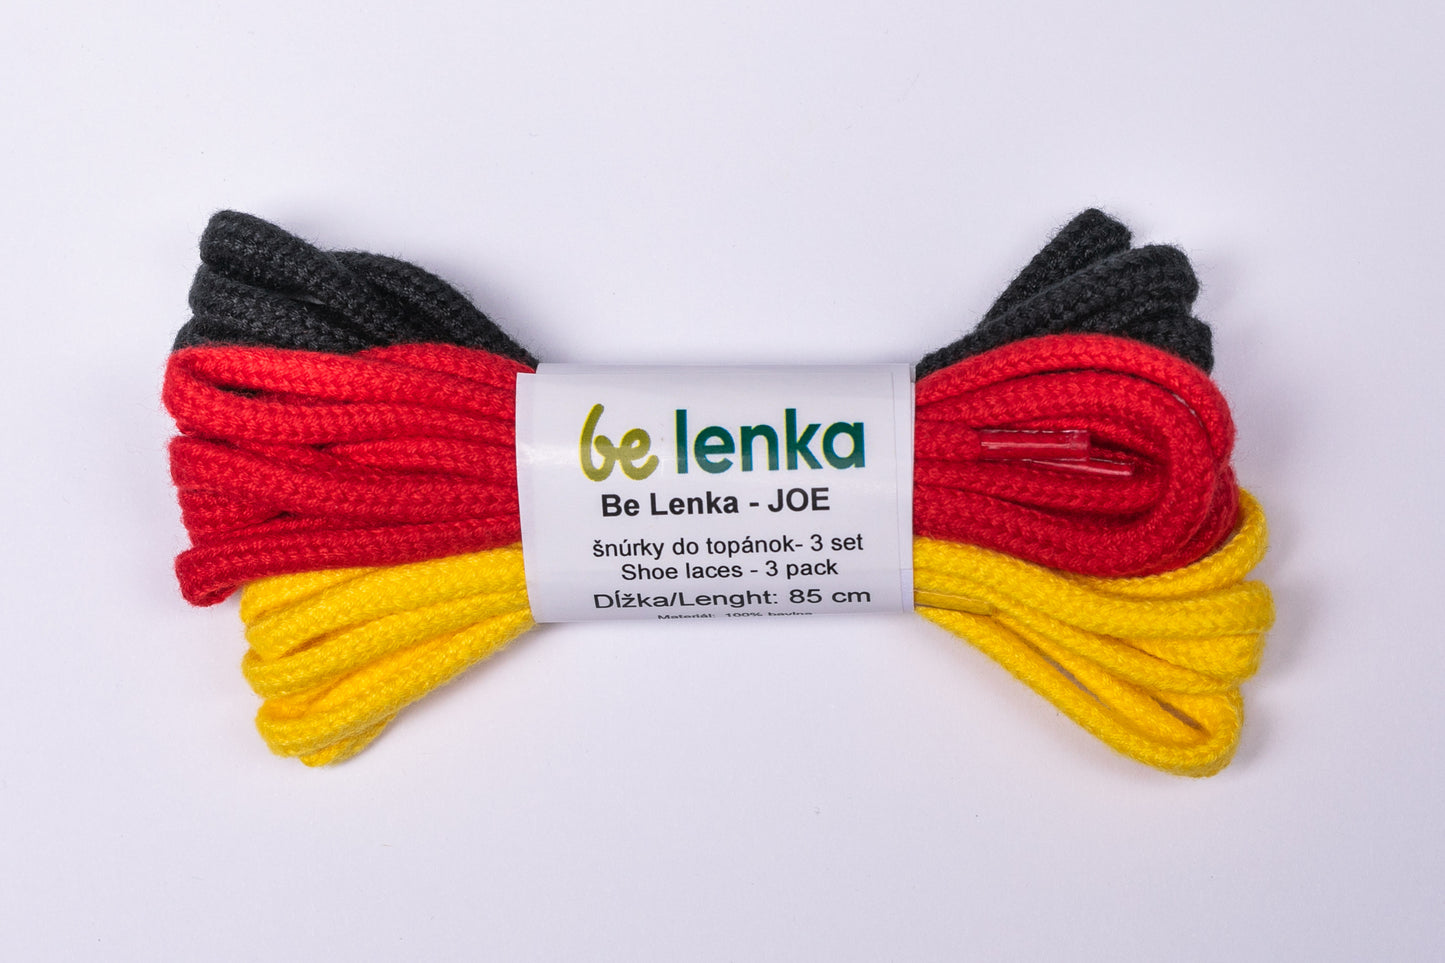 Be Lenka Shoe Laces 3 pack (85cm) - Red, Black, Yellow